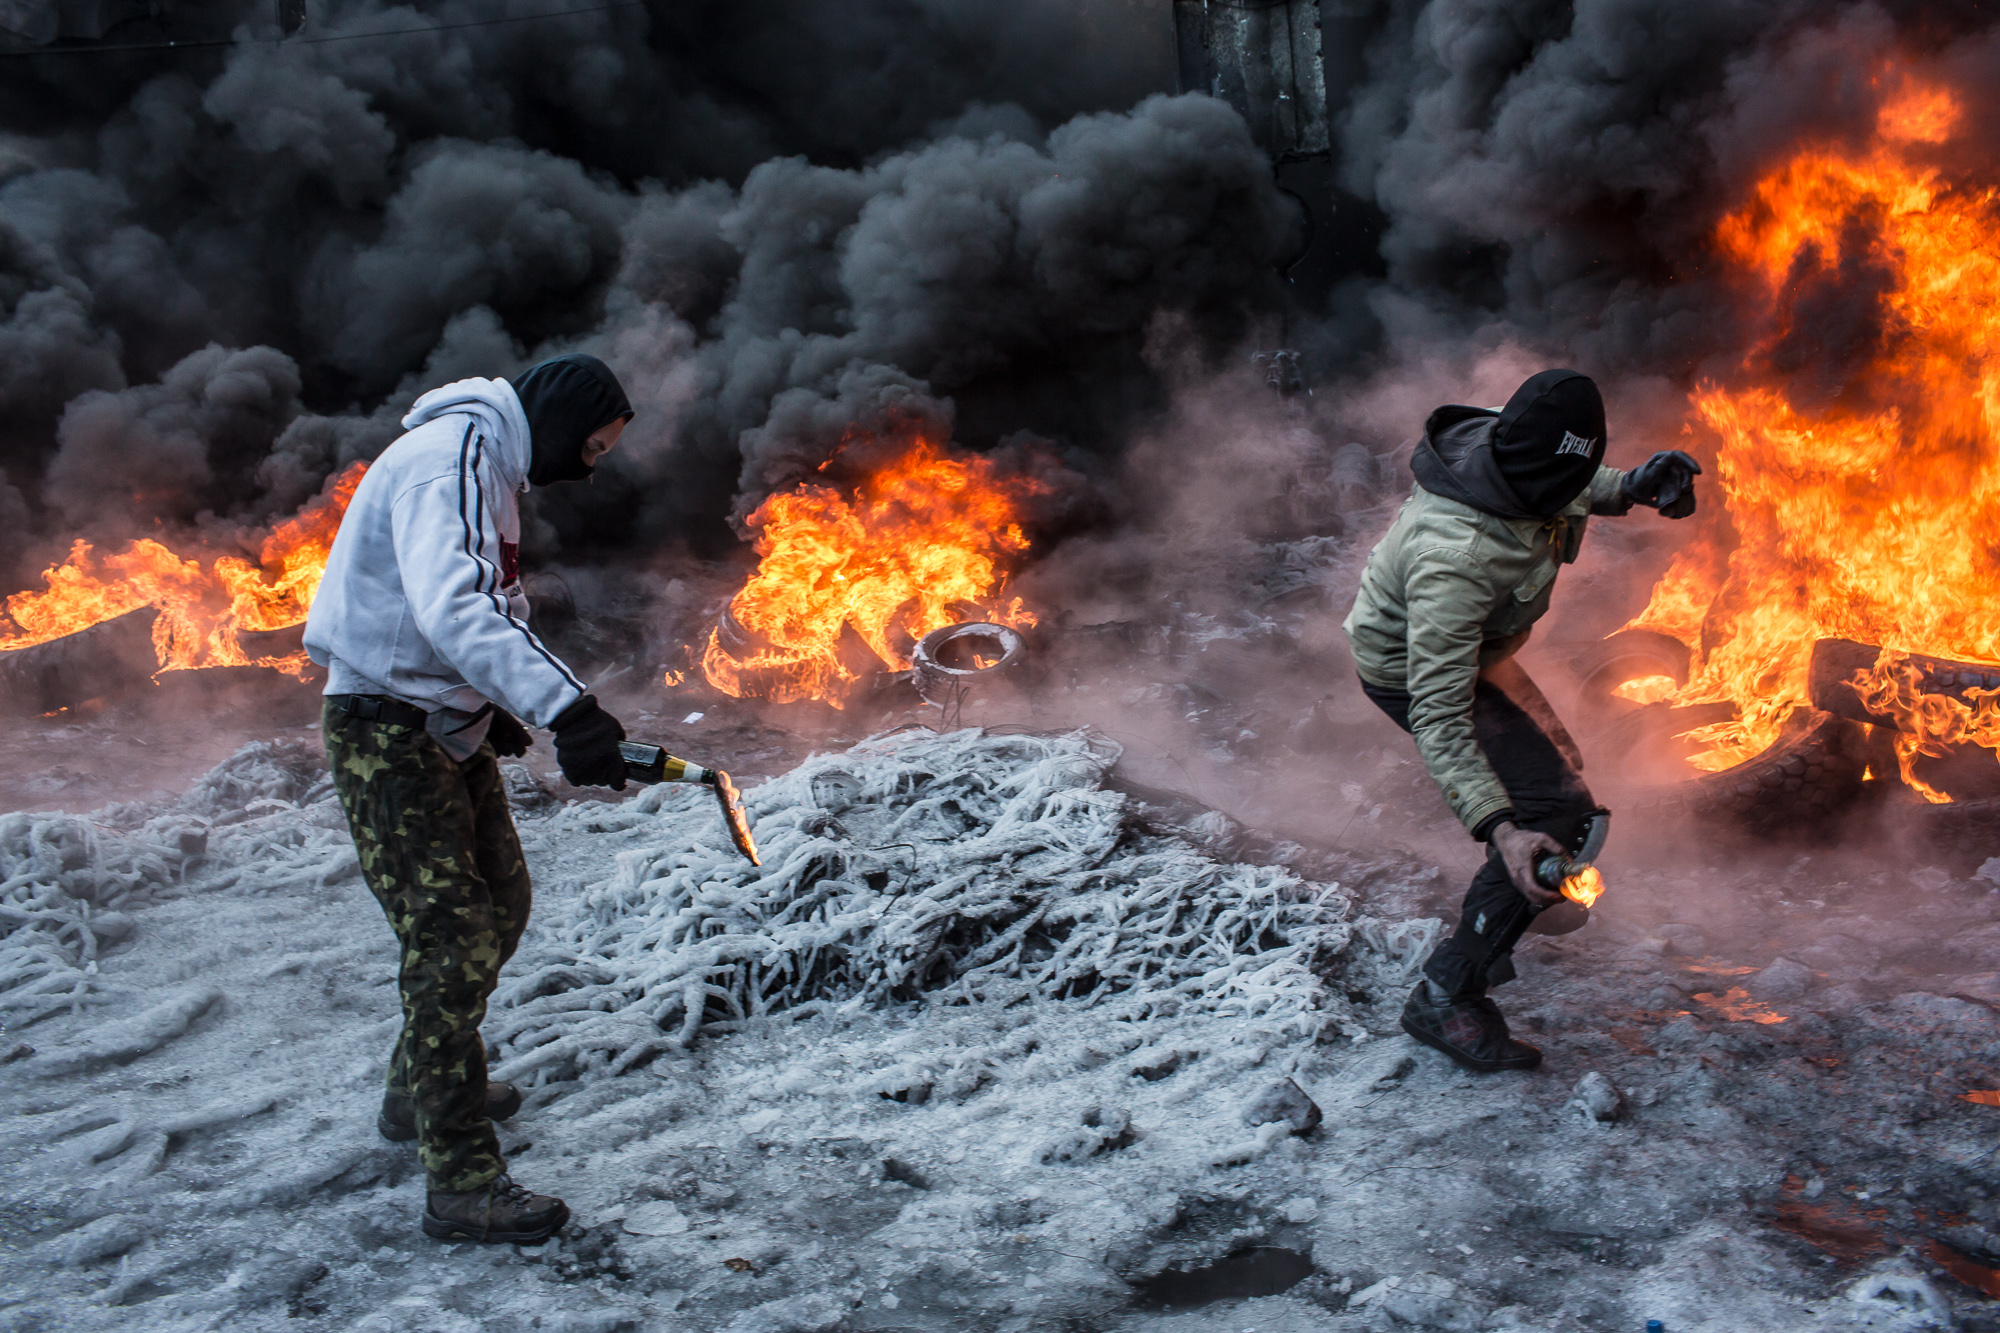  Anti-government protesters throw Molotov cocktails at police during clashes on Hrushevskoho Street near Dynamo stadium on January 25, 2014 in Kyiv, Ukraine. After two months of primarily peaceful anti-government protests in the city center, new laws